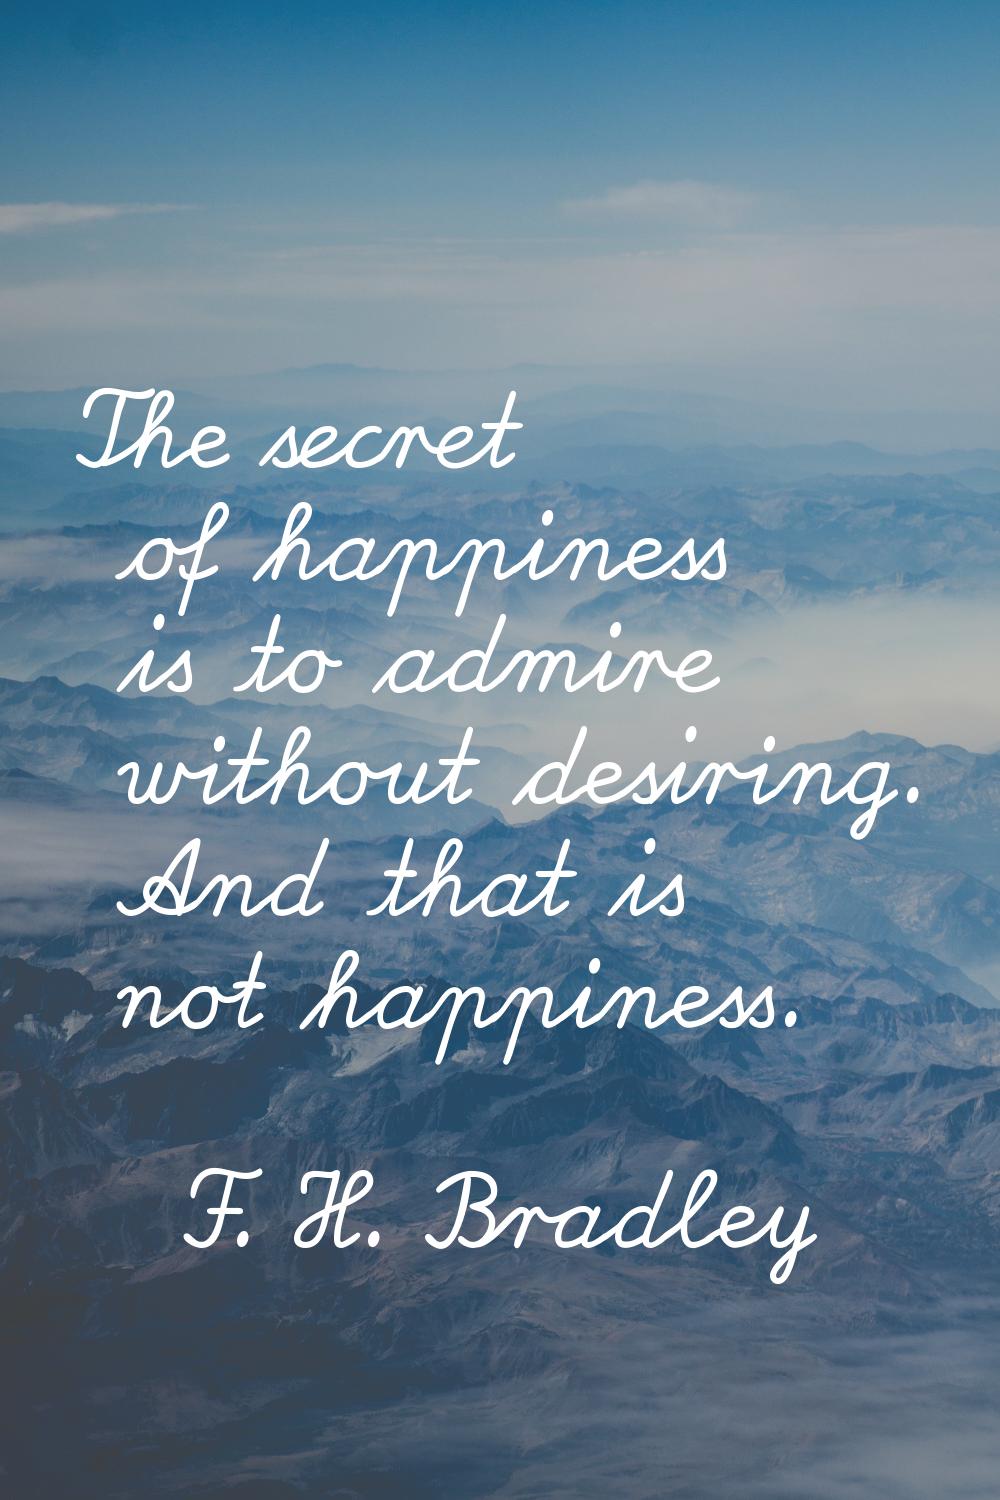 The secret of happiness is to admire without desiring. And that is not happiness.